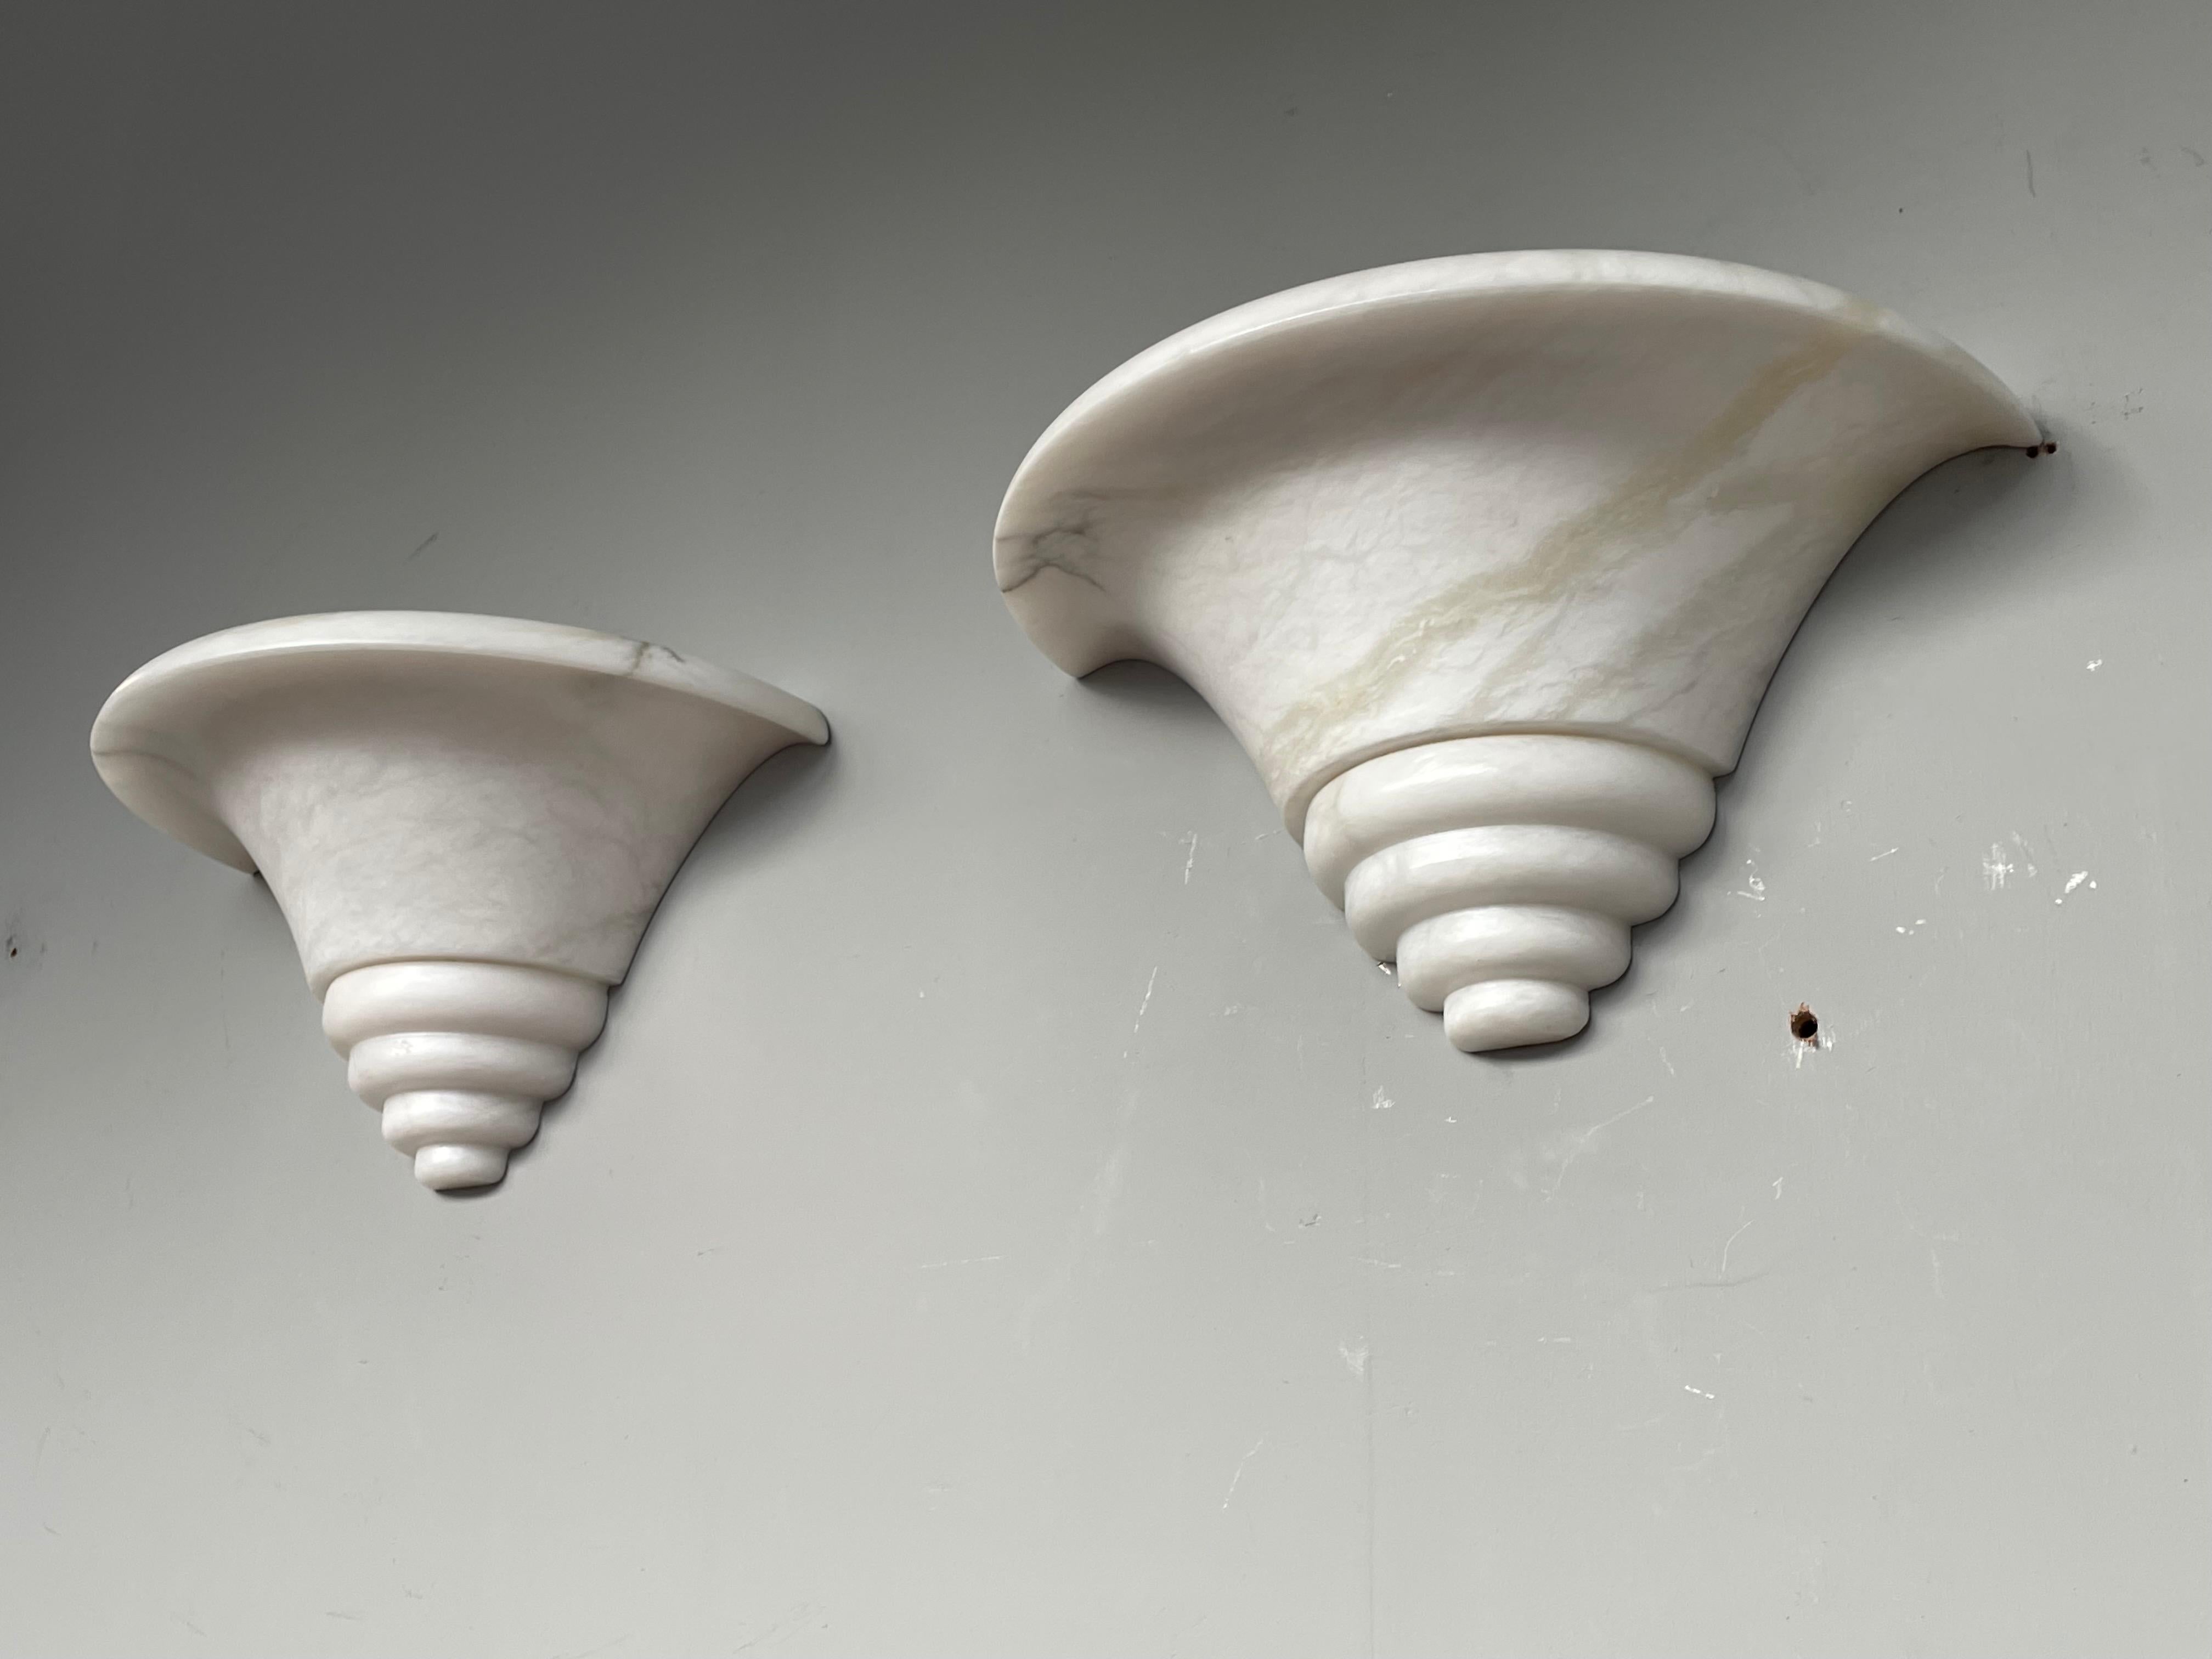 Art Deco Exceptional Shape Midcentury Era Pair of Alabaster Wall Sconces Lamps / Lights For Sale